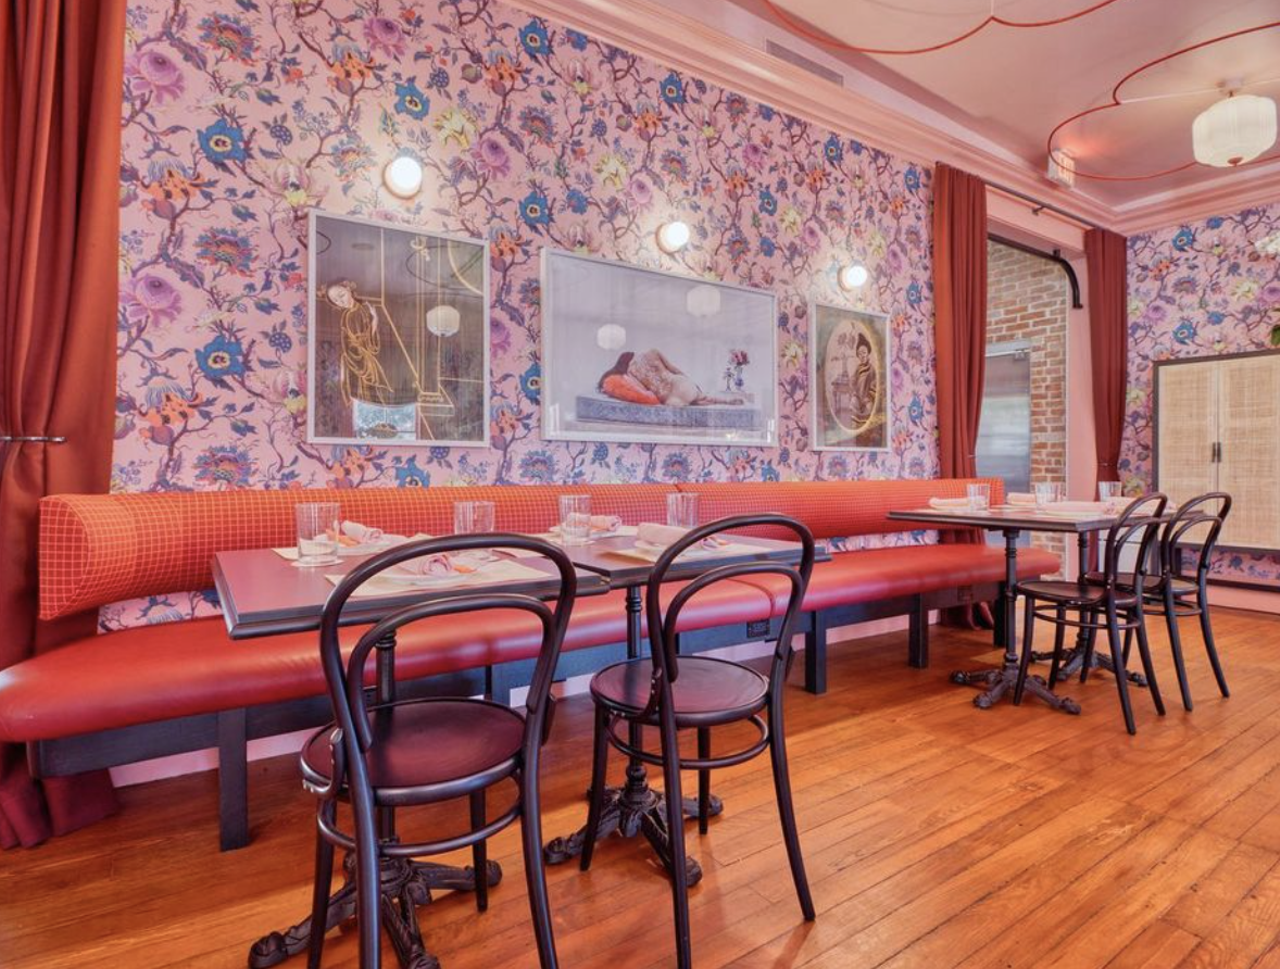 Best Quality Daughter
602 Avenue A, (210) 819-4236,  bestqualitydaughter.com
This “New Asian-American” spot at the popular Pearl complex has arguably the most SA-focused decor in town. Custom wallpaper features Alamo City landmarks in punchy colors to augment your culinary experience. 
Photo via Instagram /  bestqualitydaughter